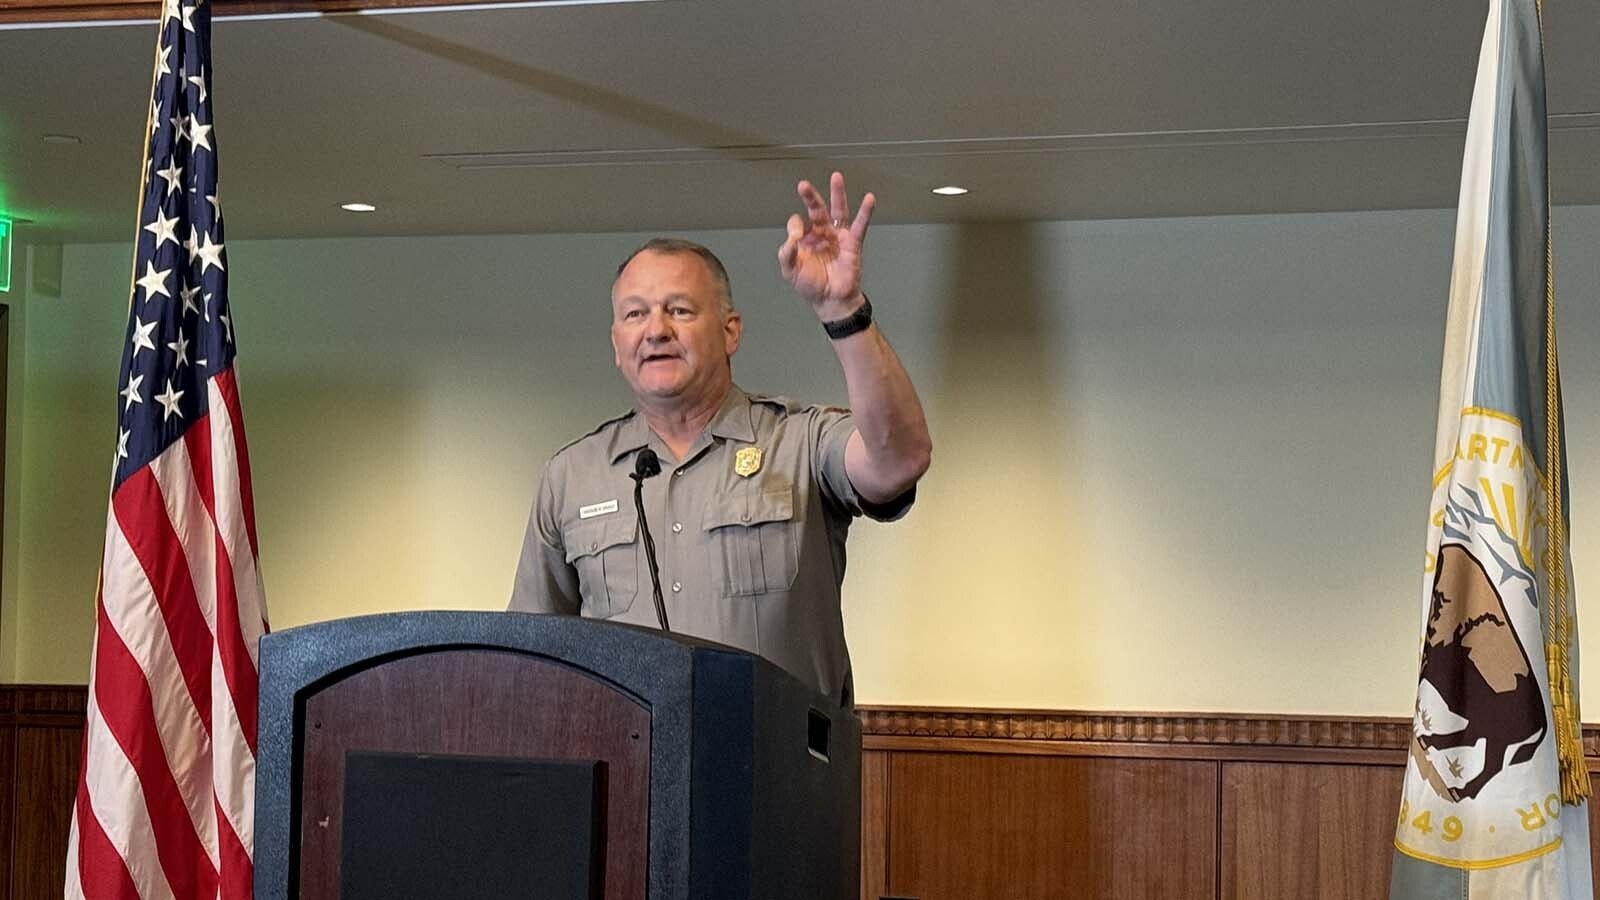 Yellowstone National Park Superintendent Cam Sholly at the announcement of the $22 million grant for the Golden Gate improvements in Yellowstone National Park.